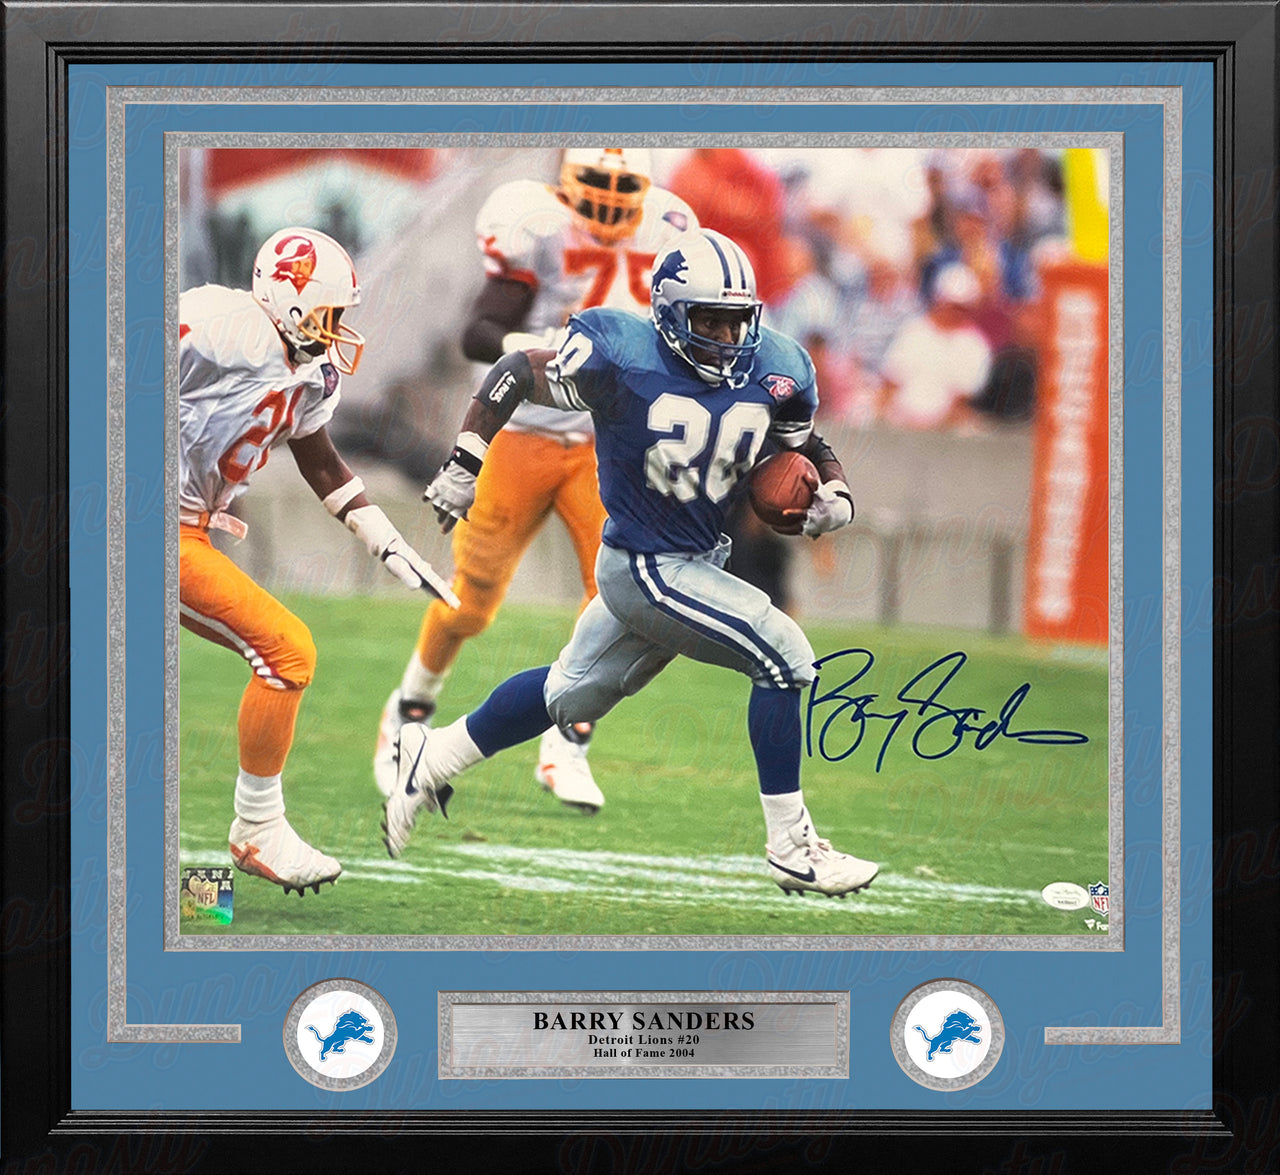 Barry Sanders in Action Detroit Lions Autographed 16" x 20" Framed Football Photo - Dynasty Sports & Framing 